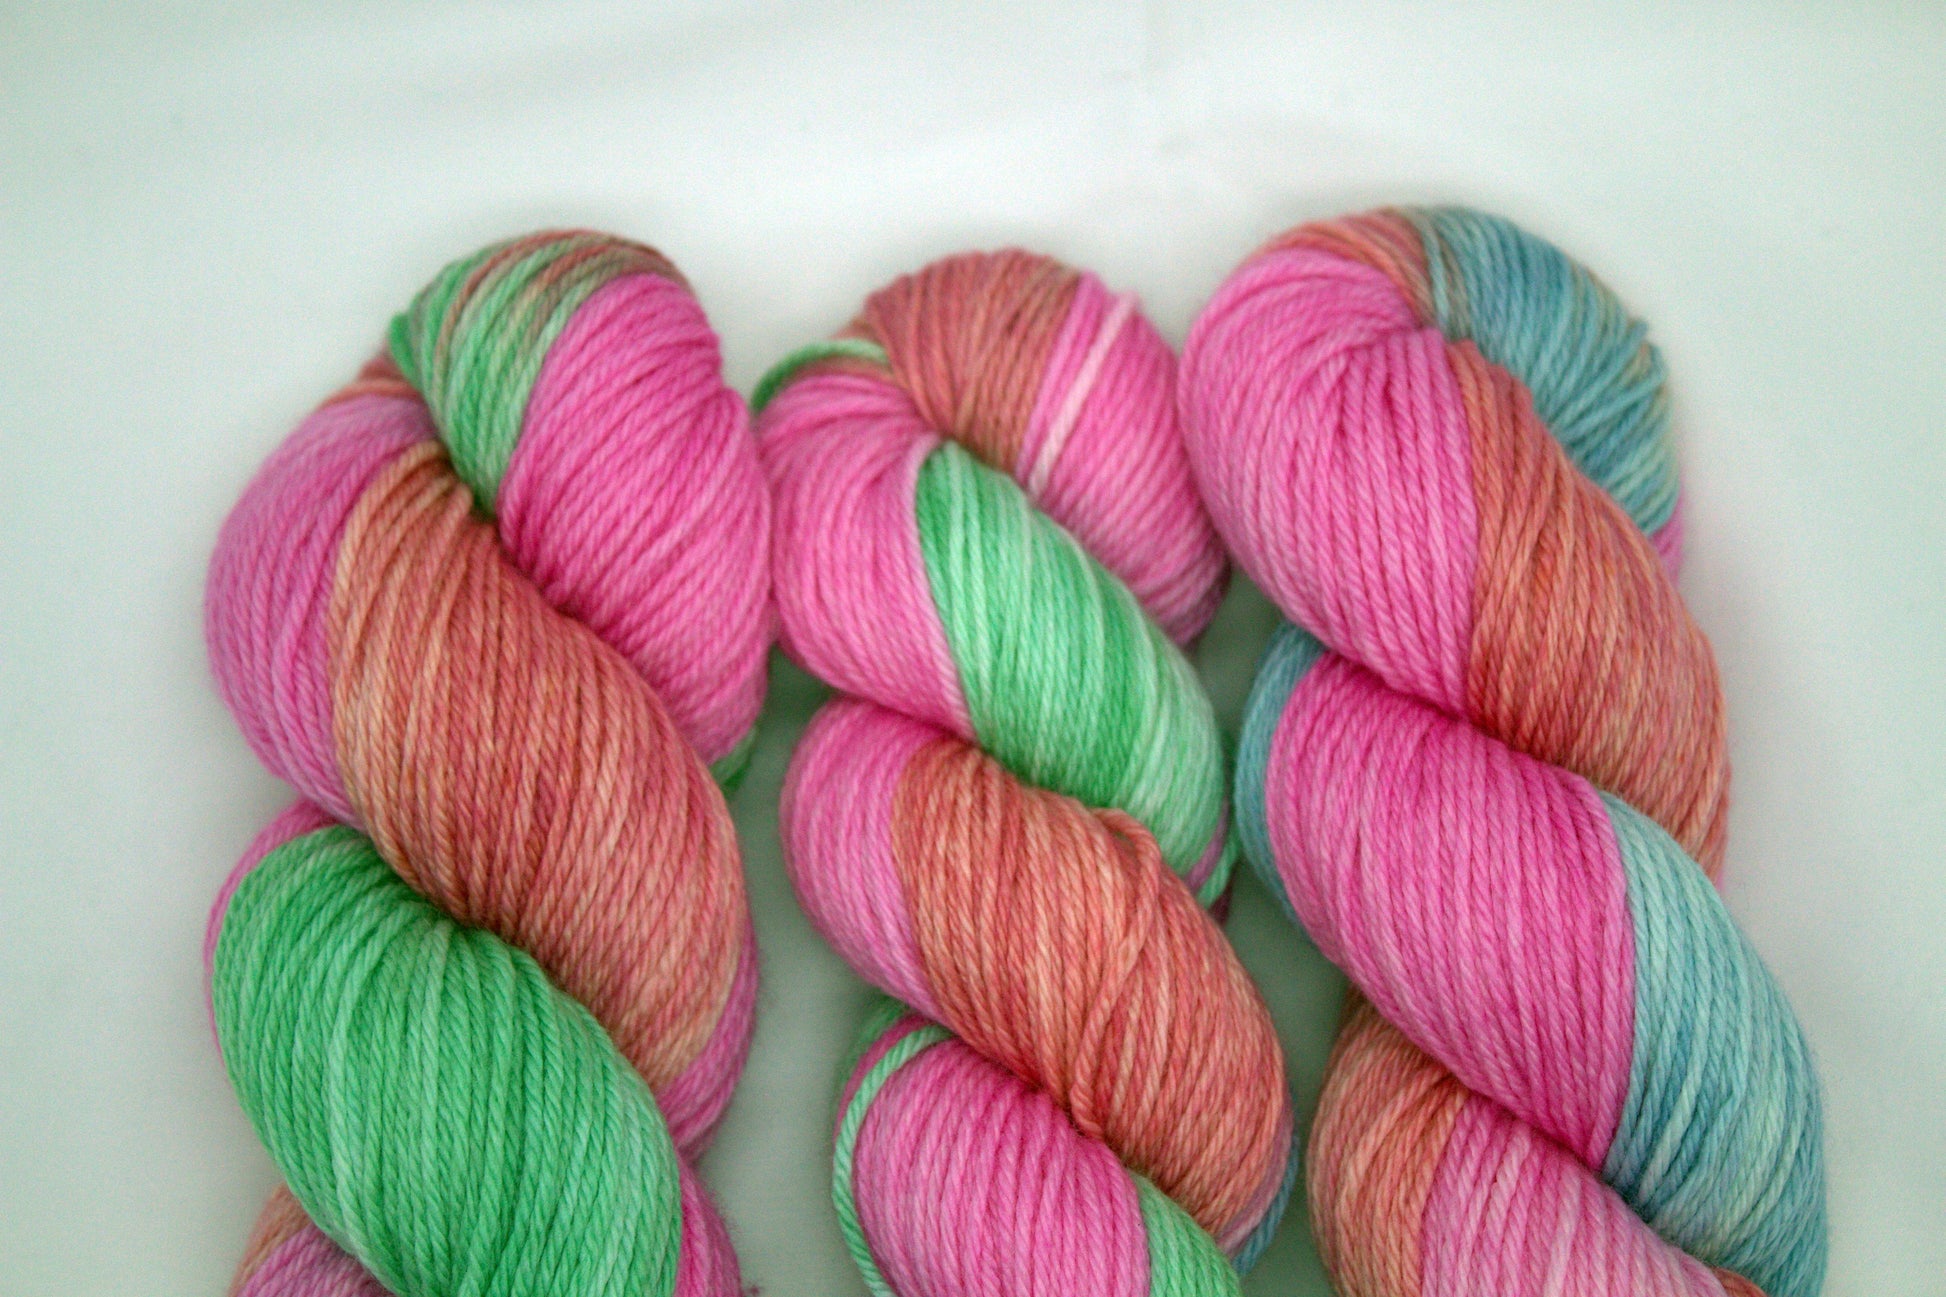 close up of three twisted skeins variegated pinks, blue and green yarn on white background.